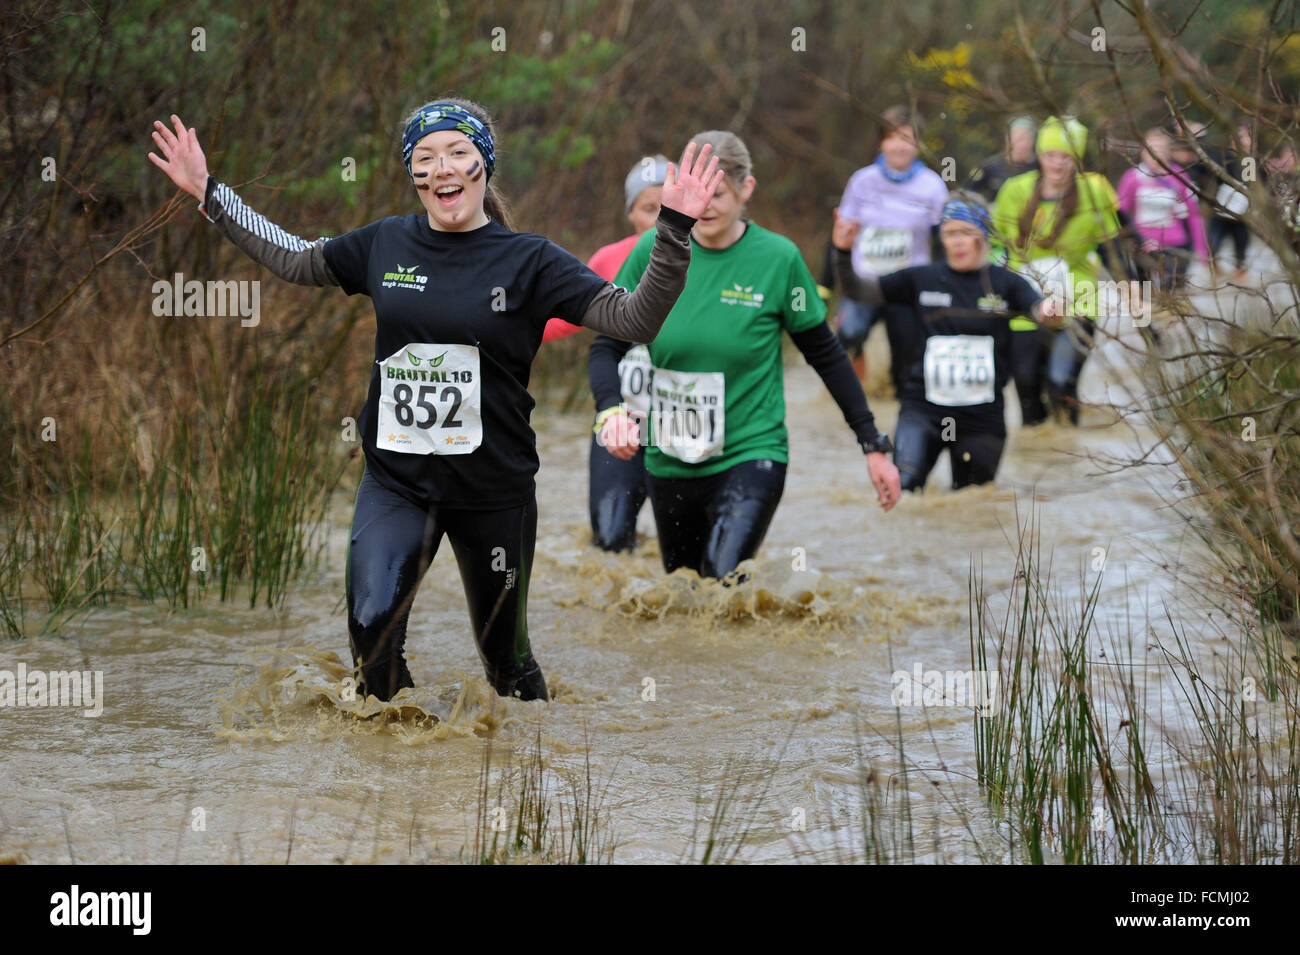 Aldershot, Hants, UK. 23rd January, 2016.  Ellen Mumford gives a smile to the camera  as she  makes her way through the flooded streams of the Brutal women only  10km  race at Long valley Aldershot Hampshire having to break the ice as the make there way around the course .  The recent weather made the Brutal 10km off road course live up to its name as the puddles and streams where up to waste height in many places with early runners having to break the ice as they entered the water. Credit:  PBWPIX/Alamy Live News Stock Photo